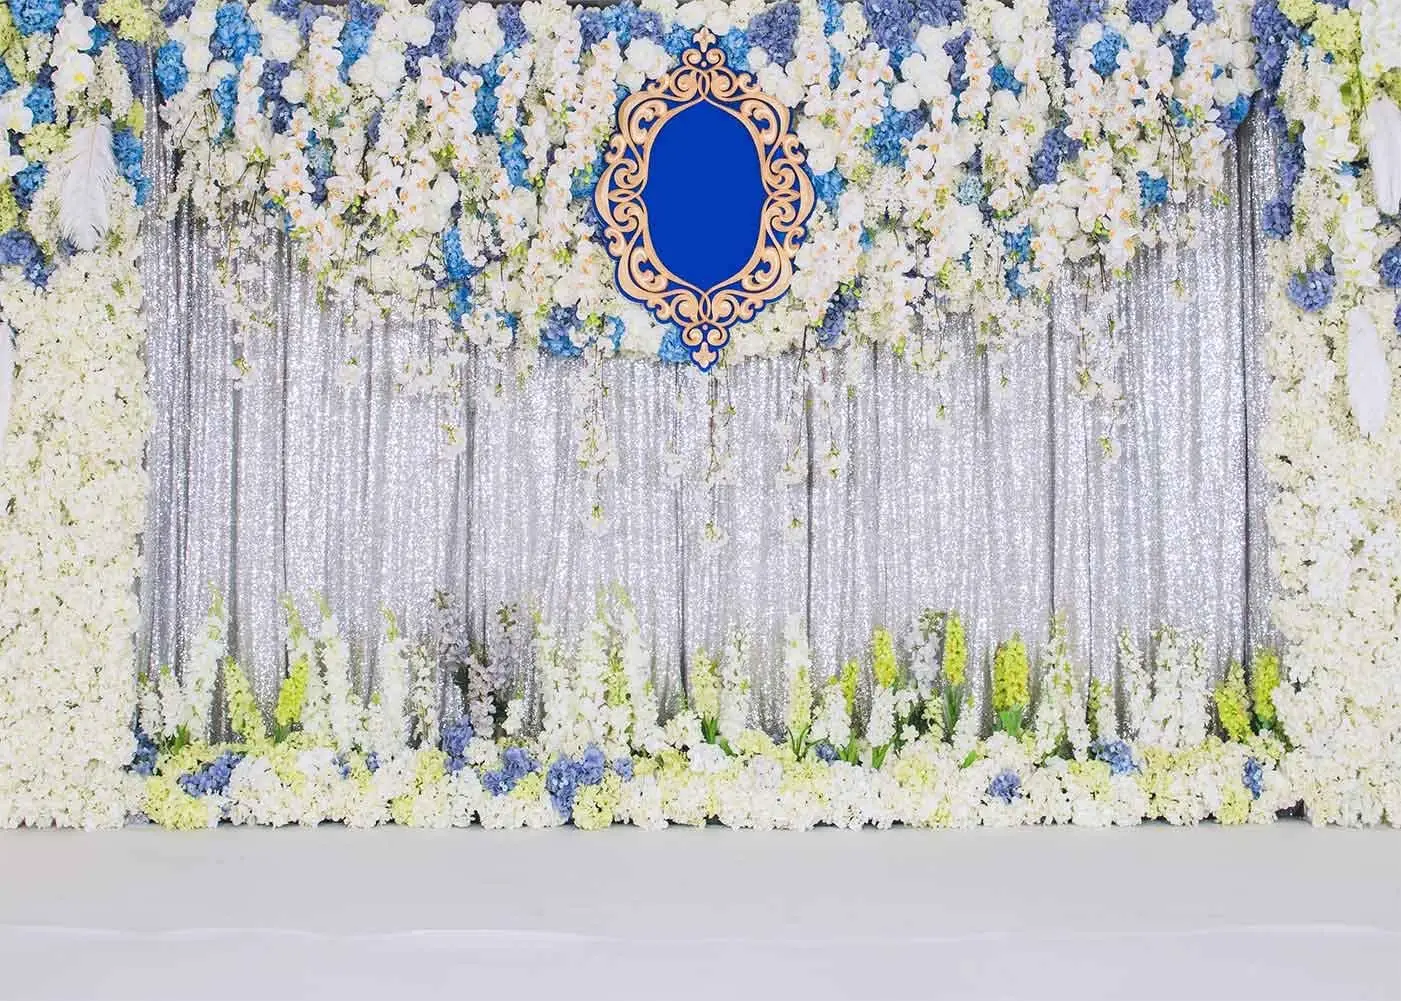 Wedding Floral Curtain Backdrop Blue White Light Flower Background for Marriage Ceremony Decor Photo Booth Studio Props enlarge